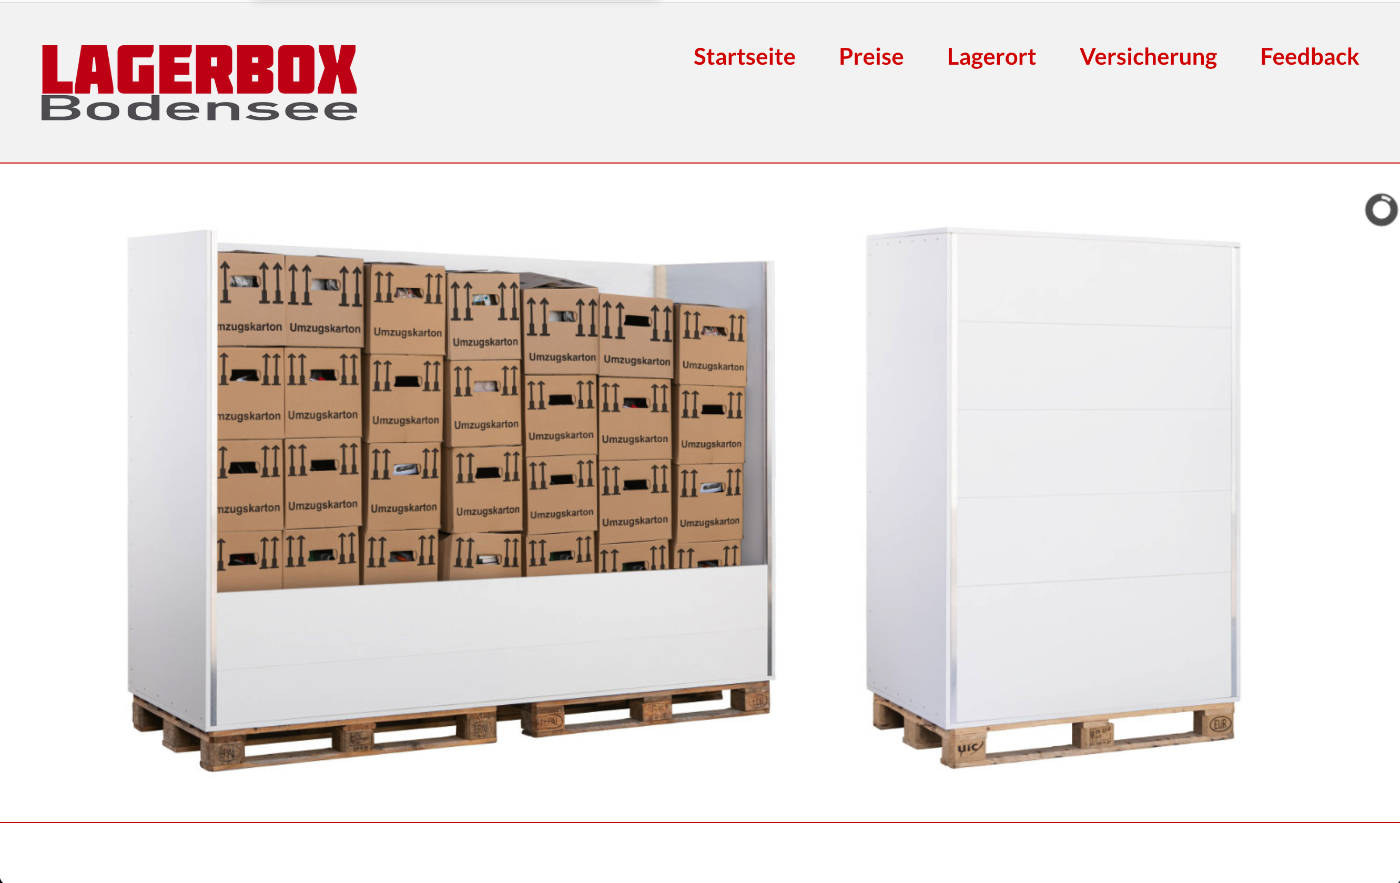 Lagerbox Bodensee